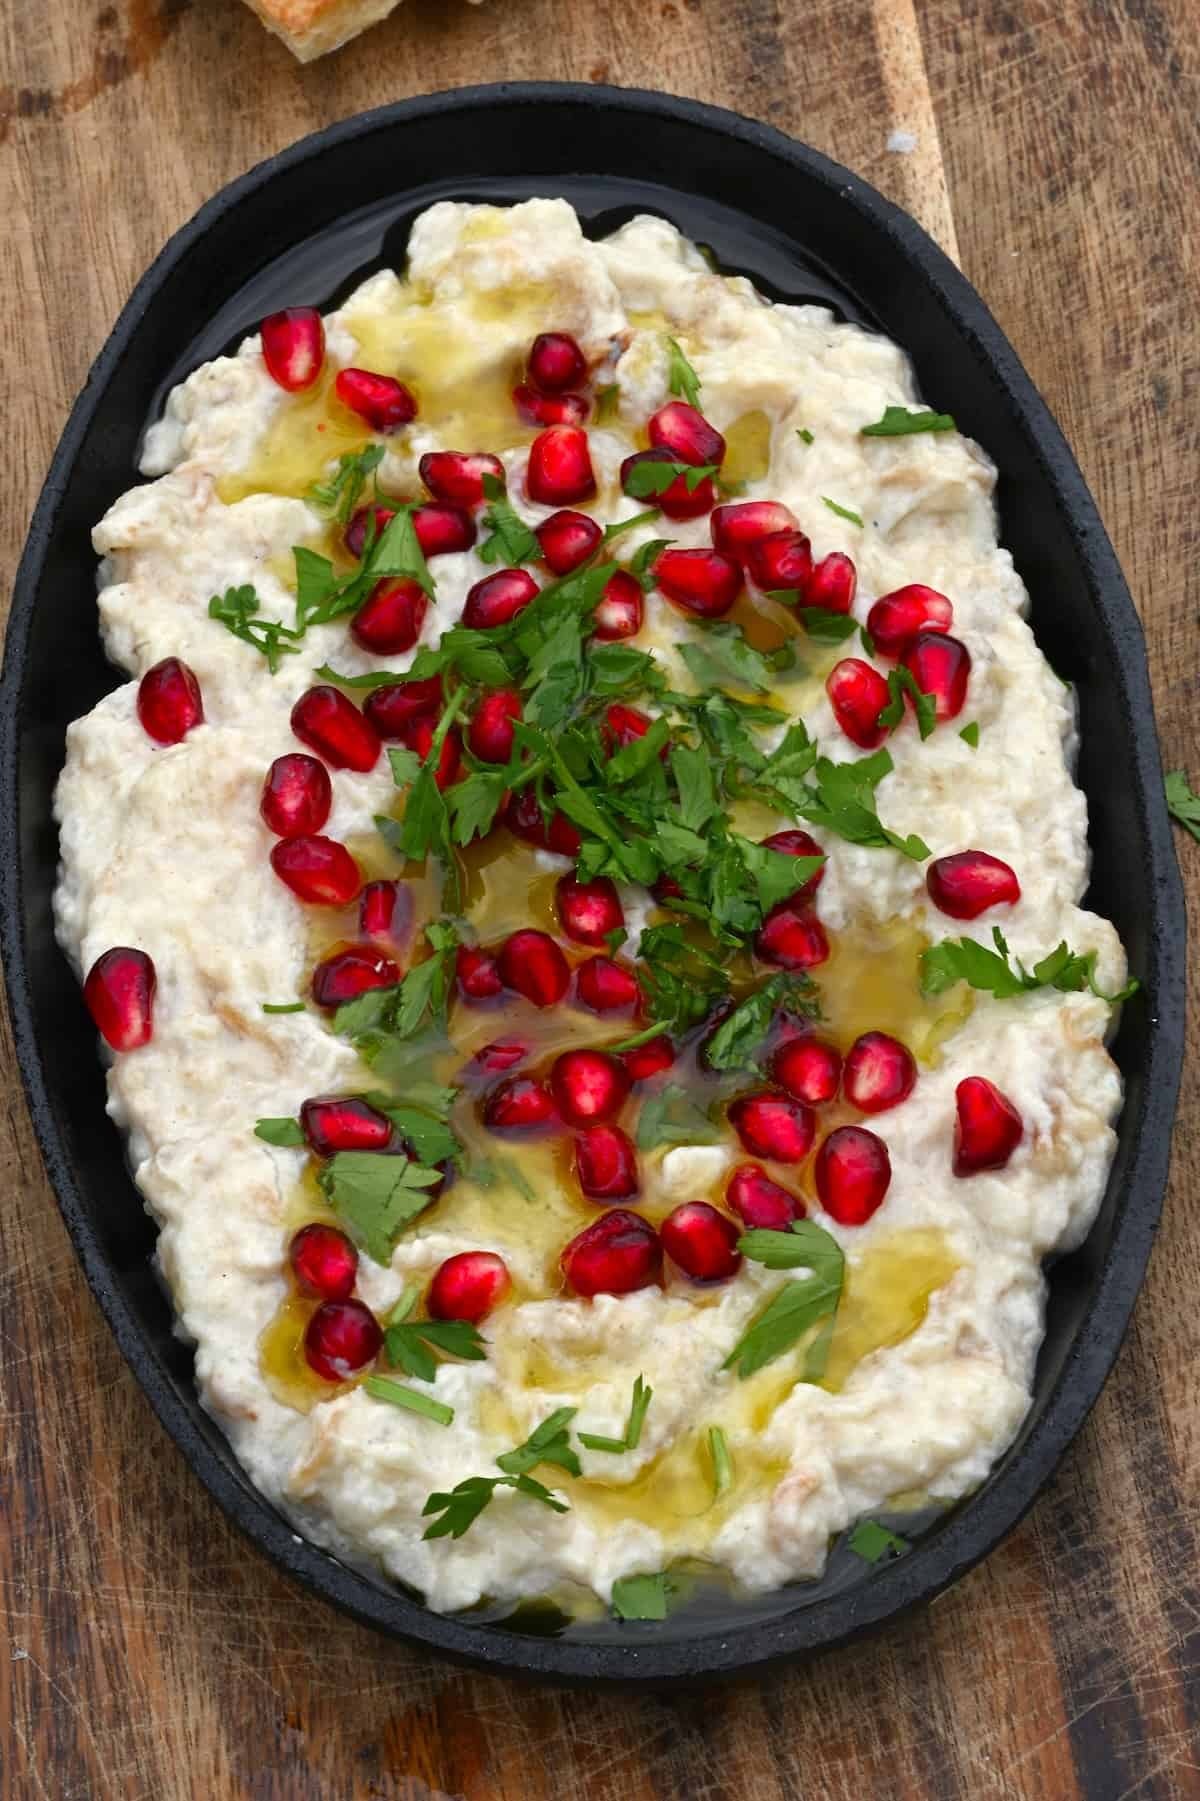 Homemade baba ghanoush topped with pomegranate seeds and parsley